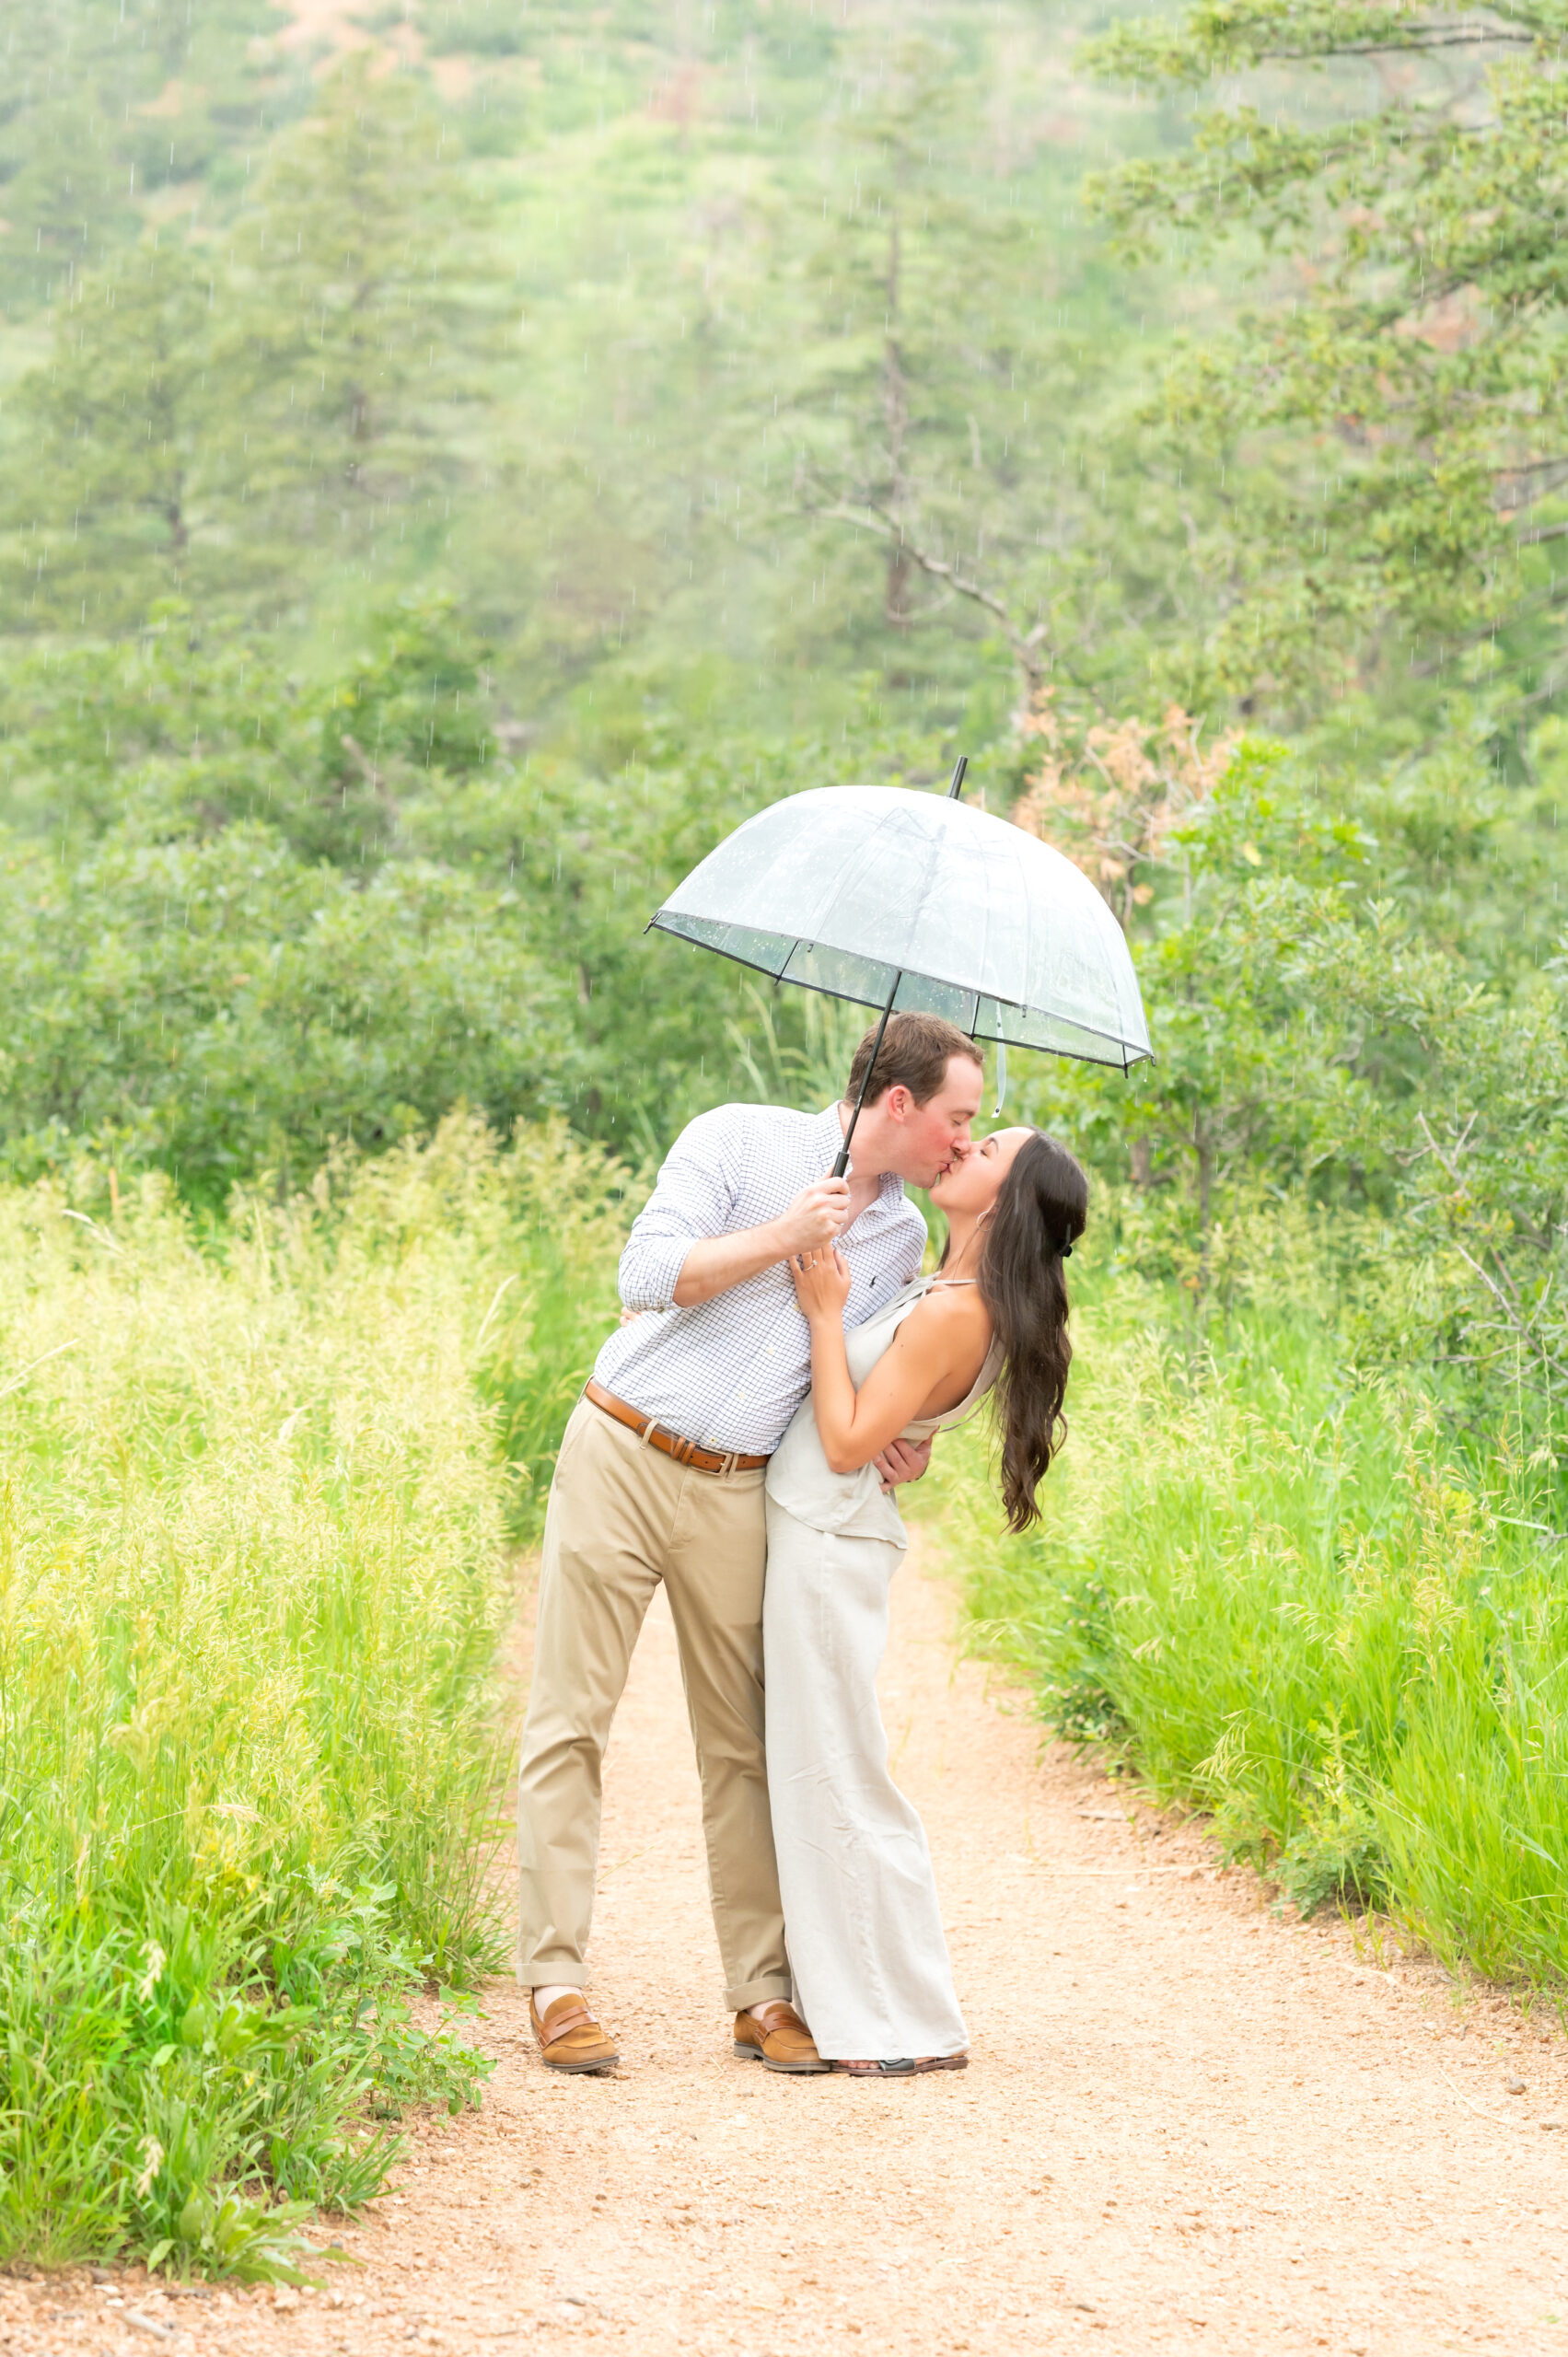 Couple kissing under the umbrella together to celebrate their engagement